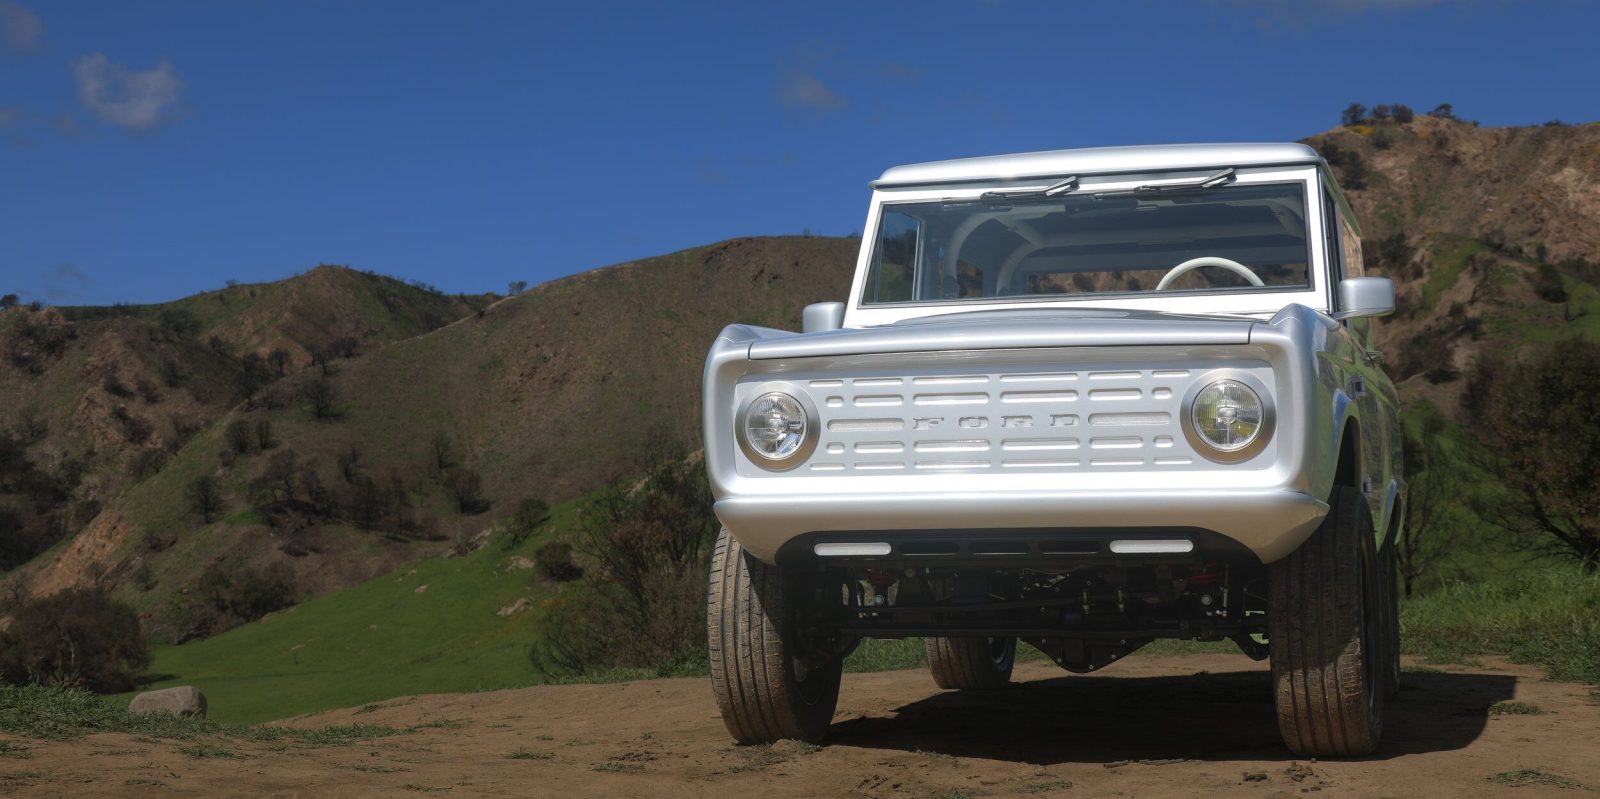 Modern Ford Bronco on dirt road